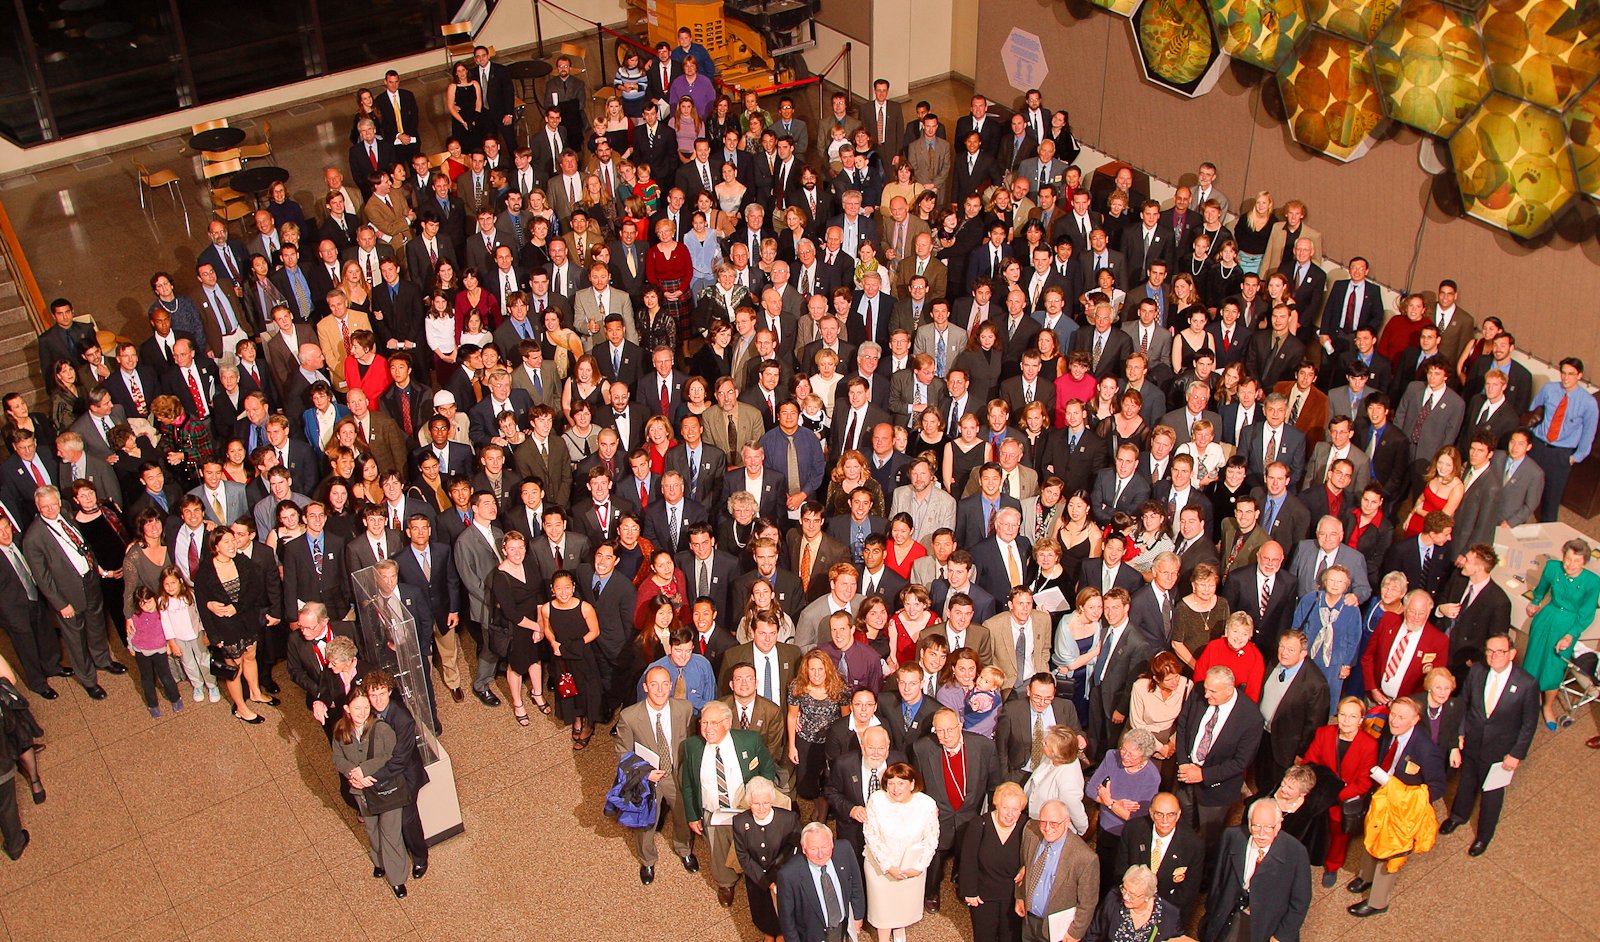 large-reunion-group-shot-at-boston-museum-of-science_4869545991_o.jpg